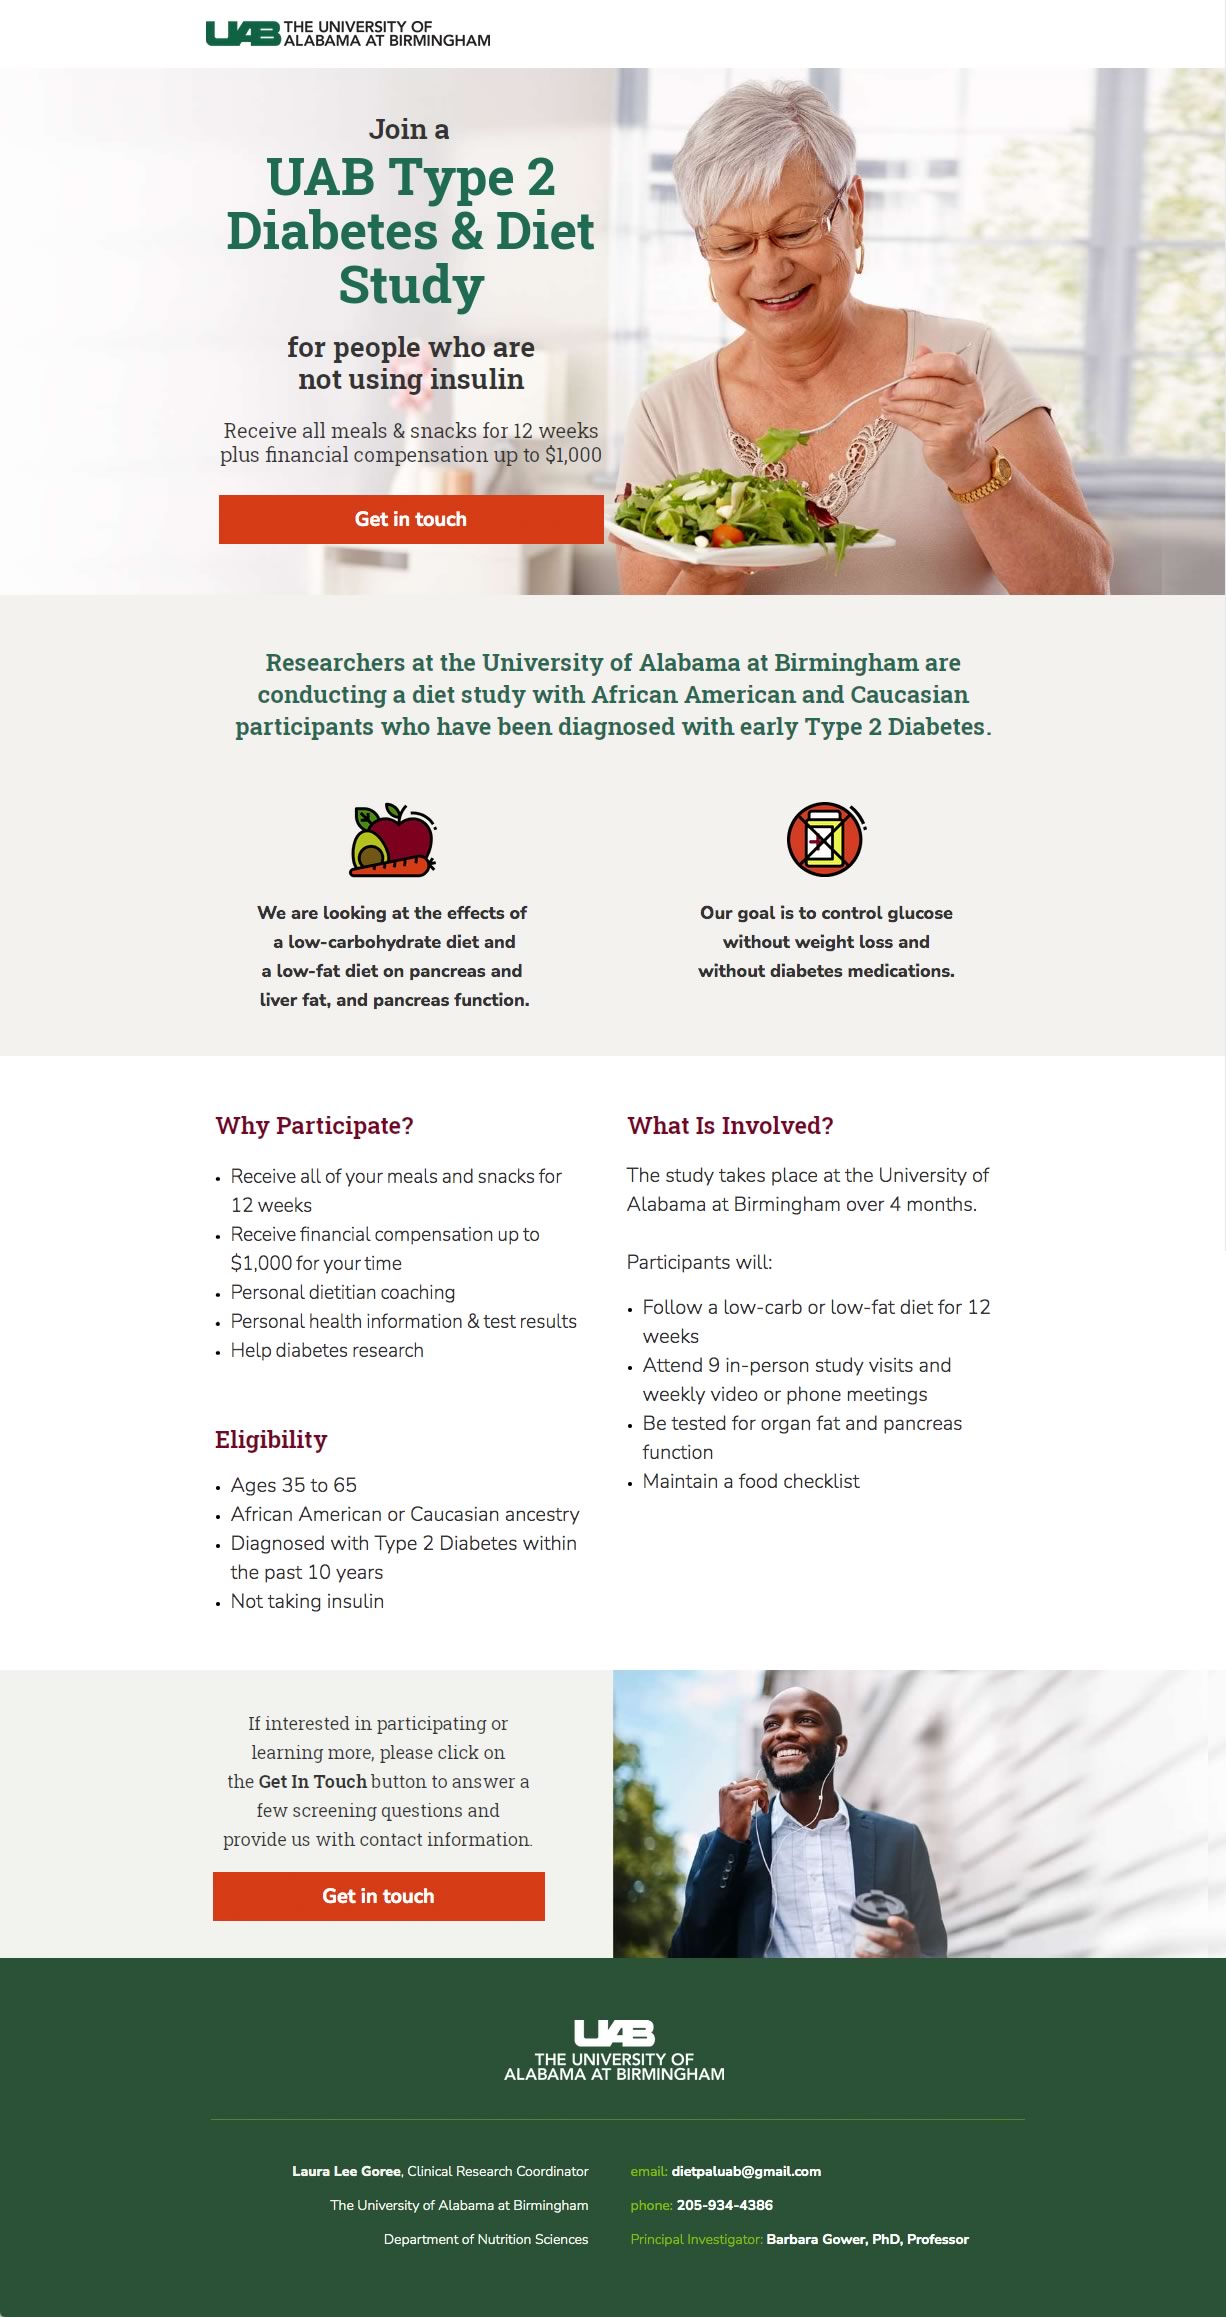 Capture of the full 'UAB Type 2 Diabetes & Diet Study' landing page